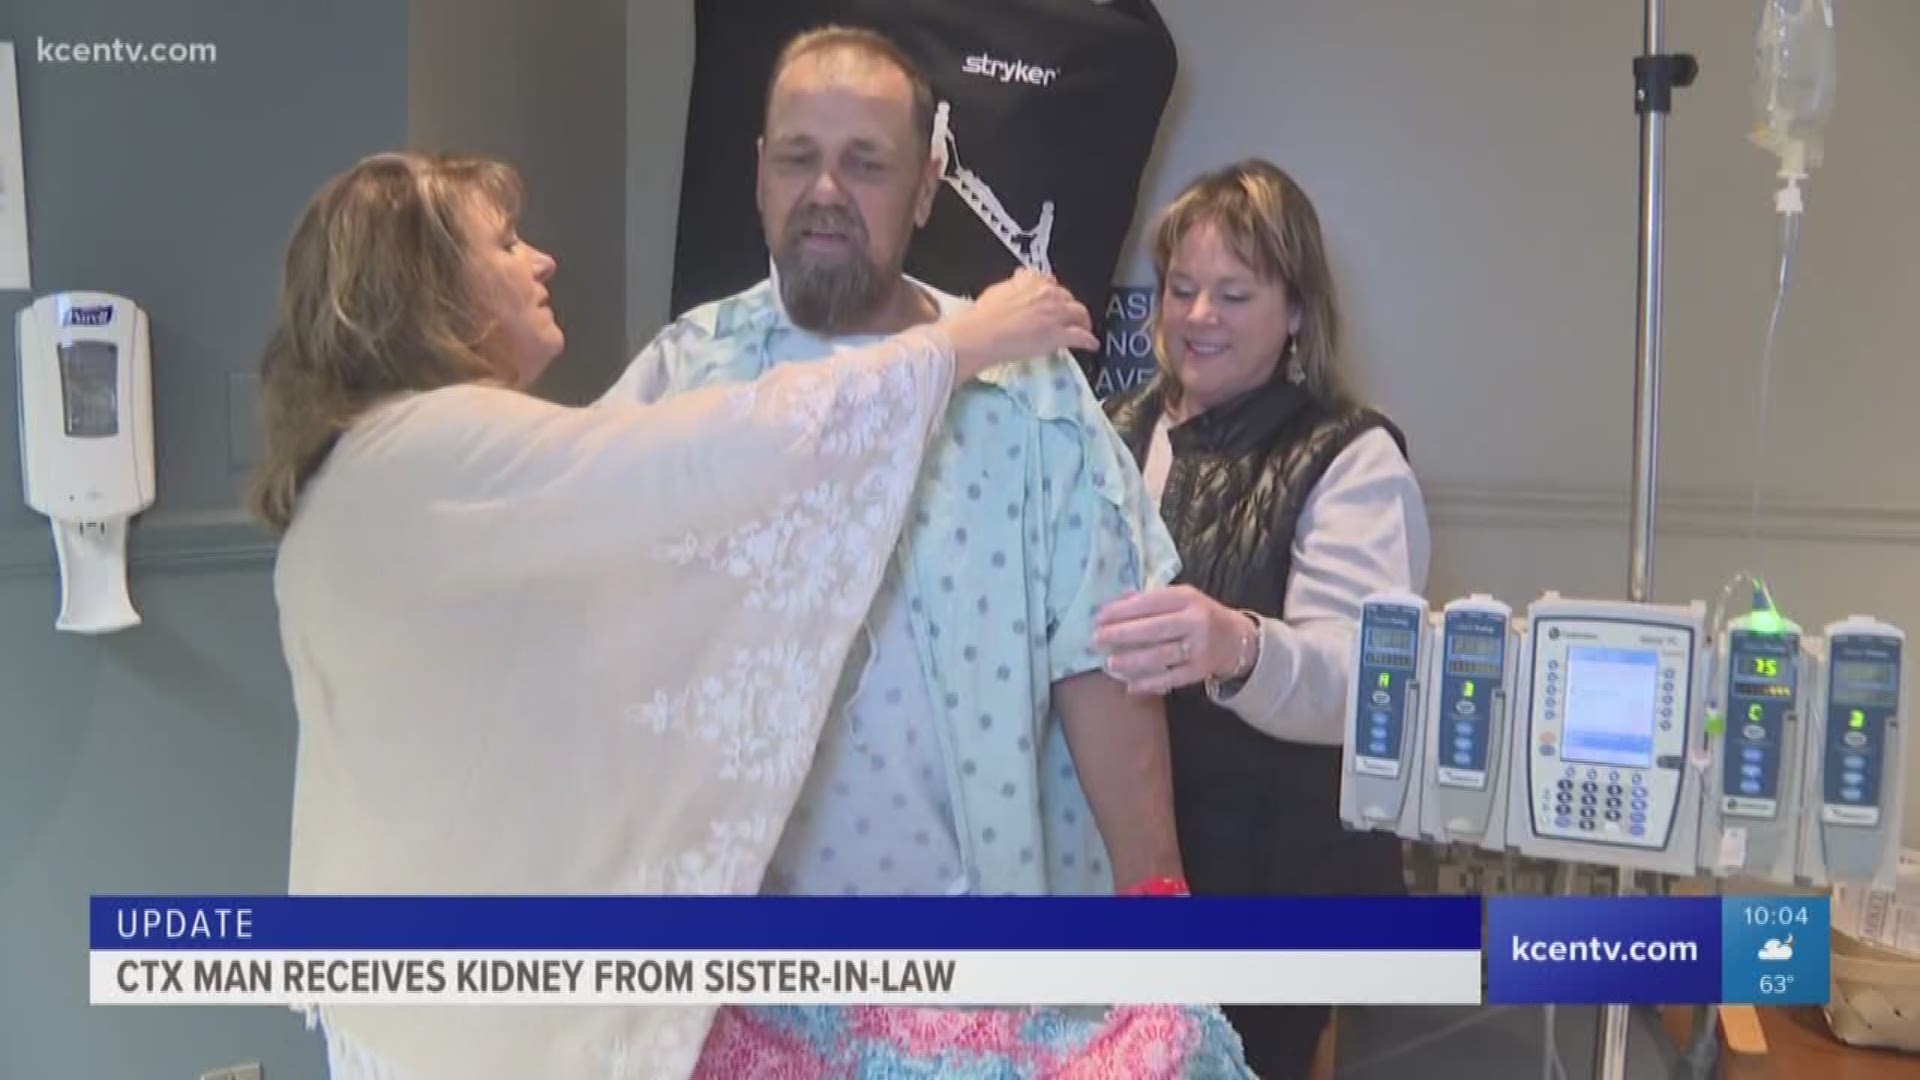 Frank Cantrell struggled with kidney failure for nine years, until his sister-in-law turned out to be a match for him. Janice Berryman hopped on a plane from Idaho to Texas as soon as she found out she was a match.